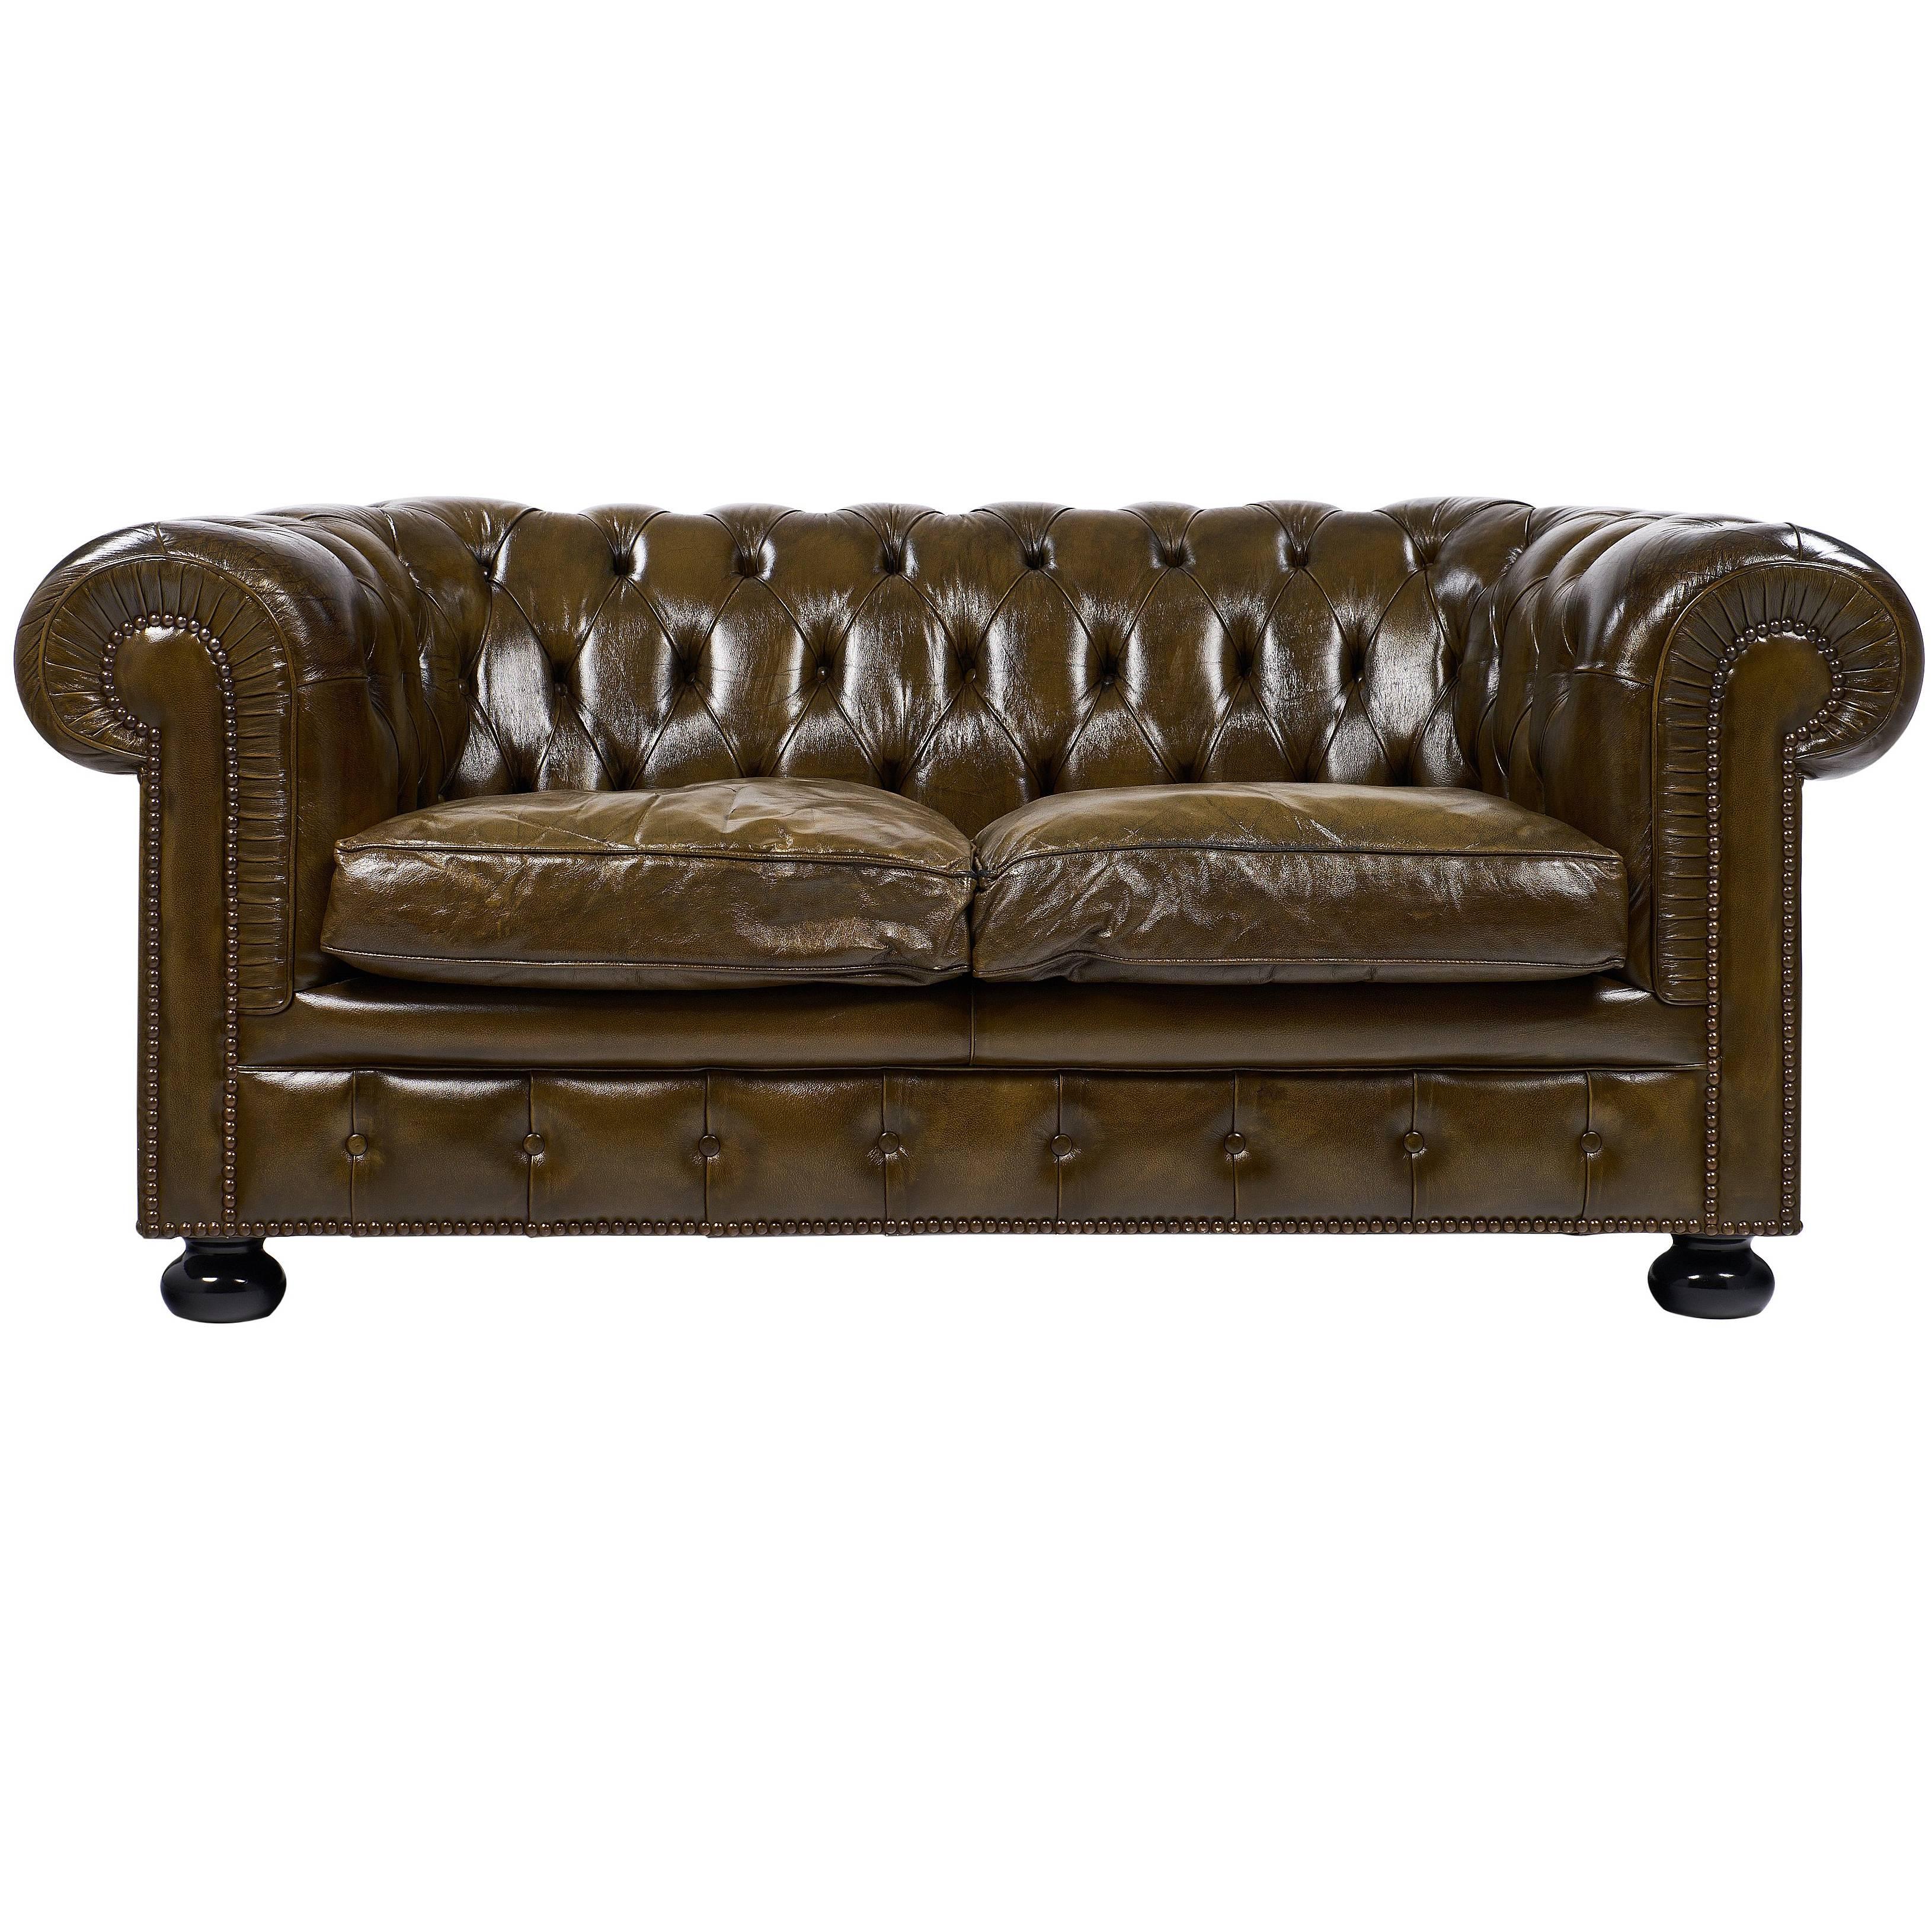 English Vintage Chesterfield Leather Sofa